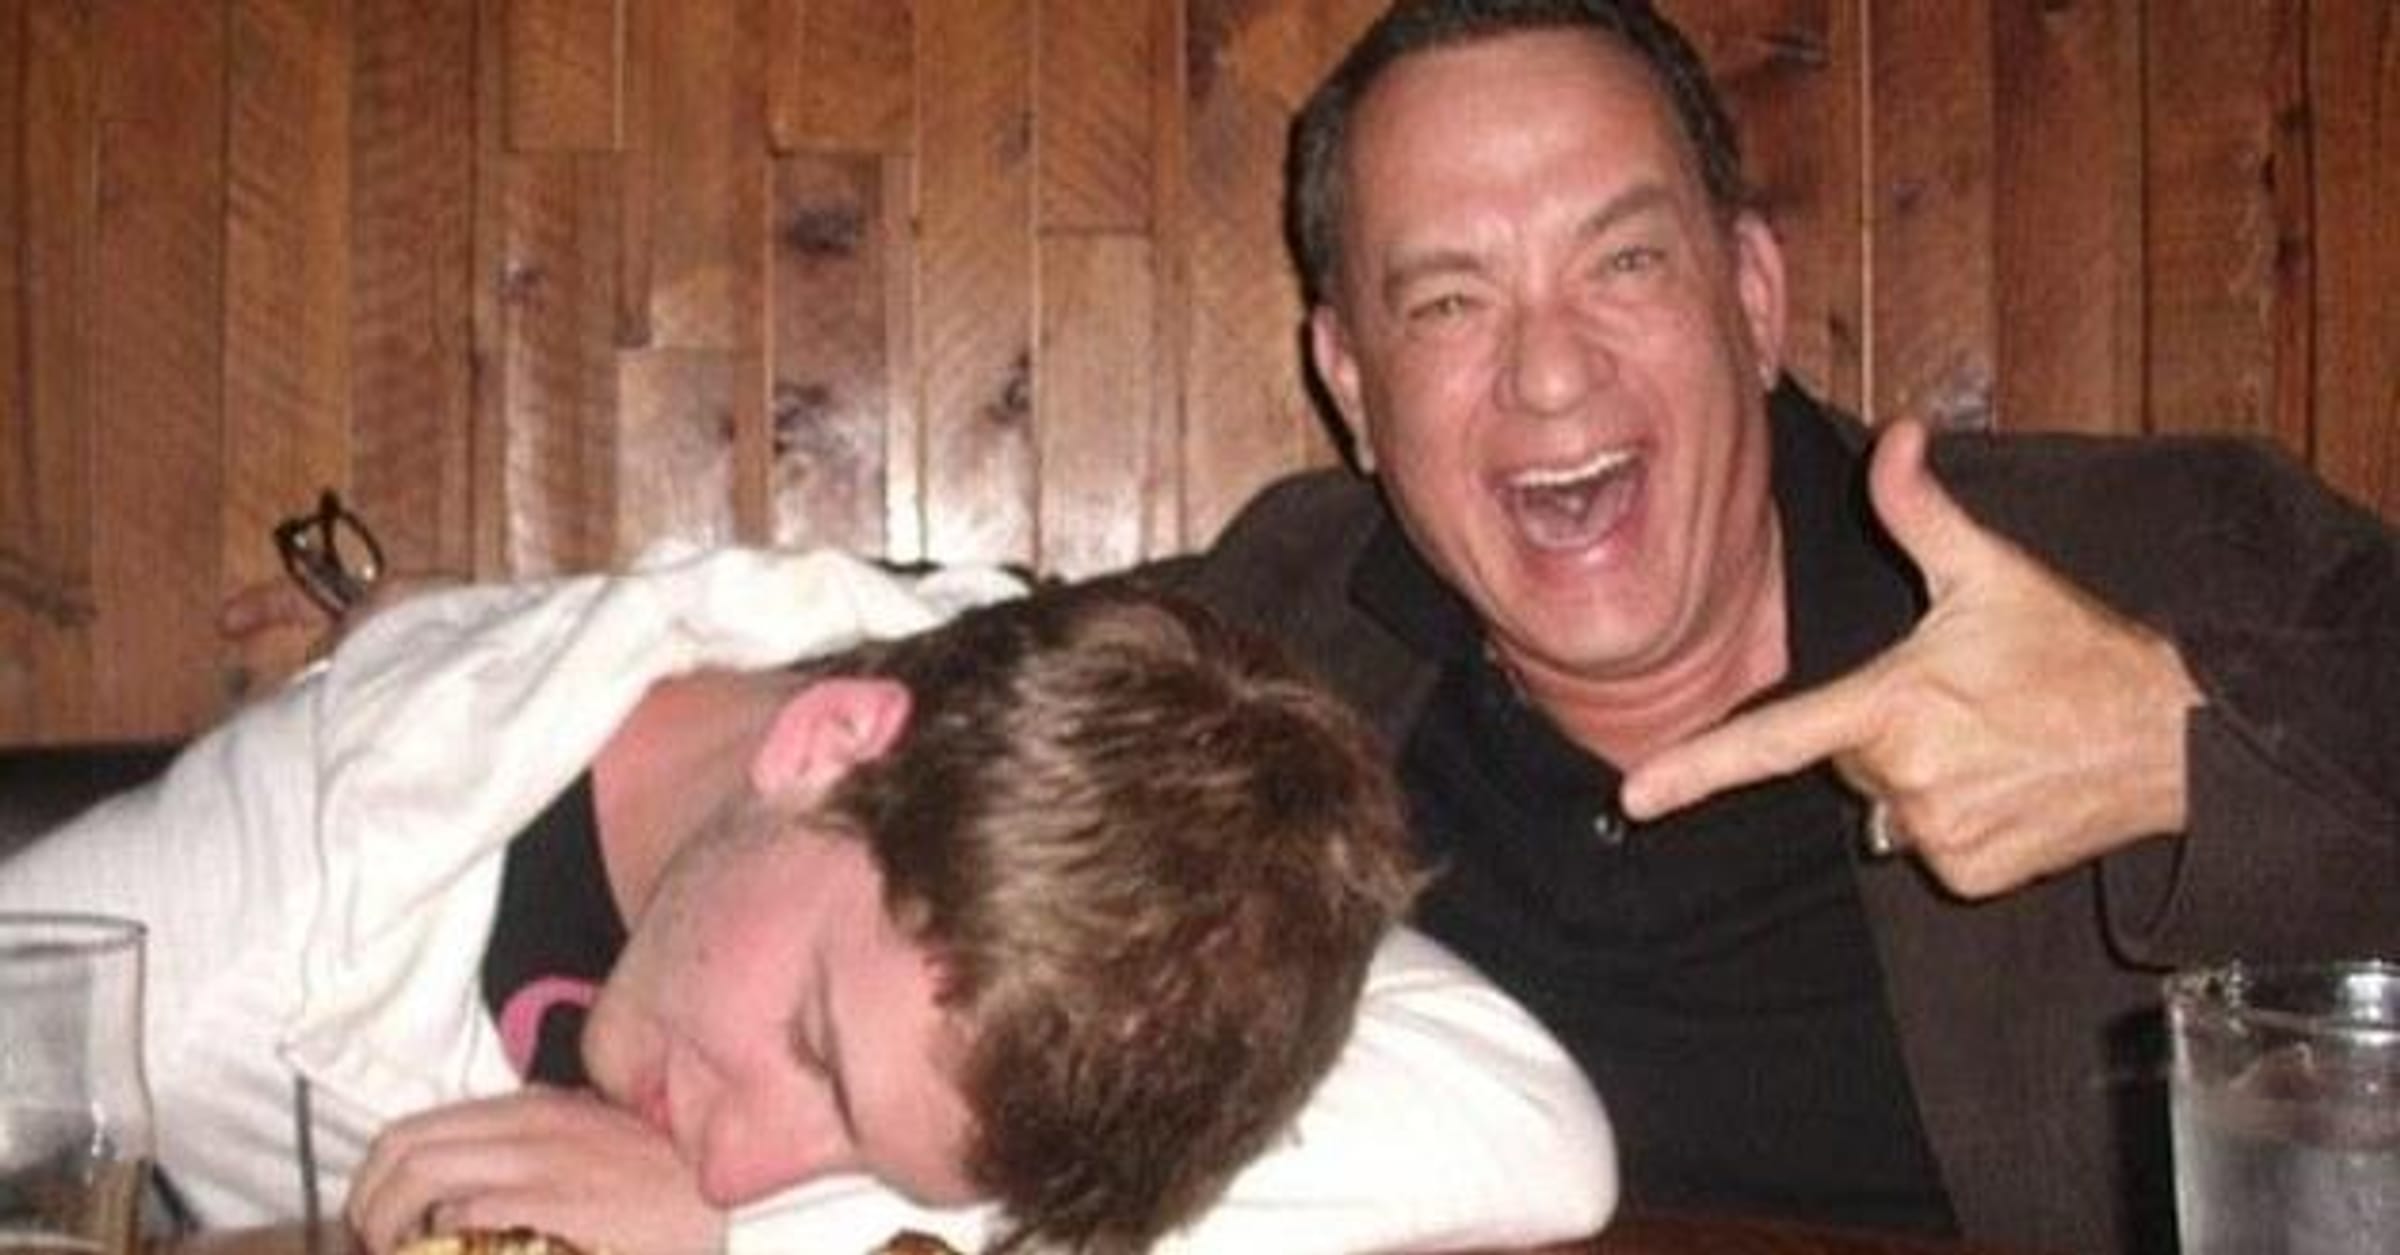 Incredible Story Of Tom Hanks & His Transformation That Halted